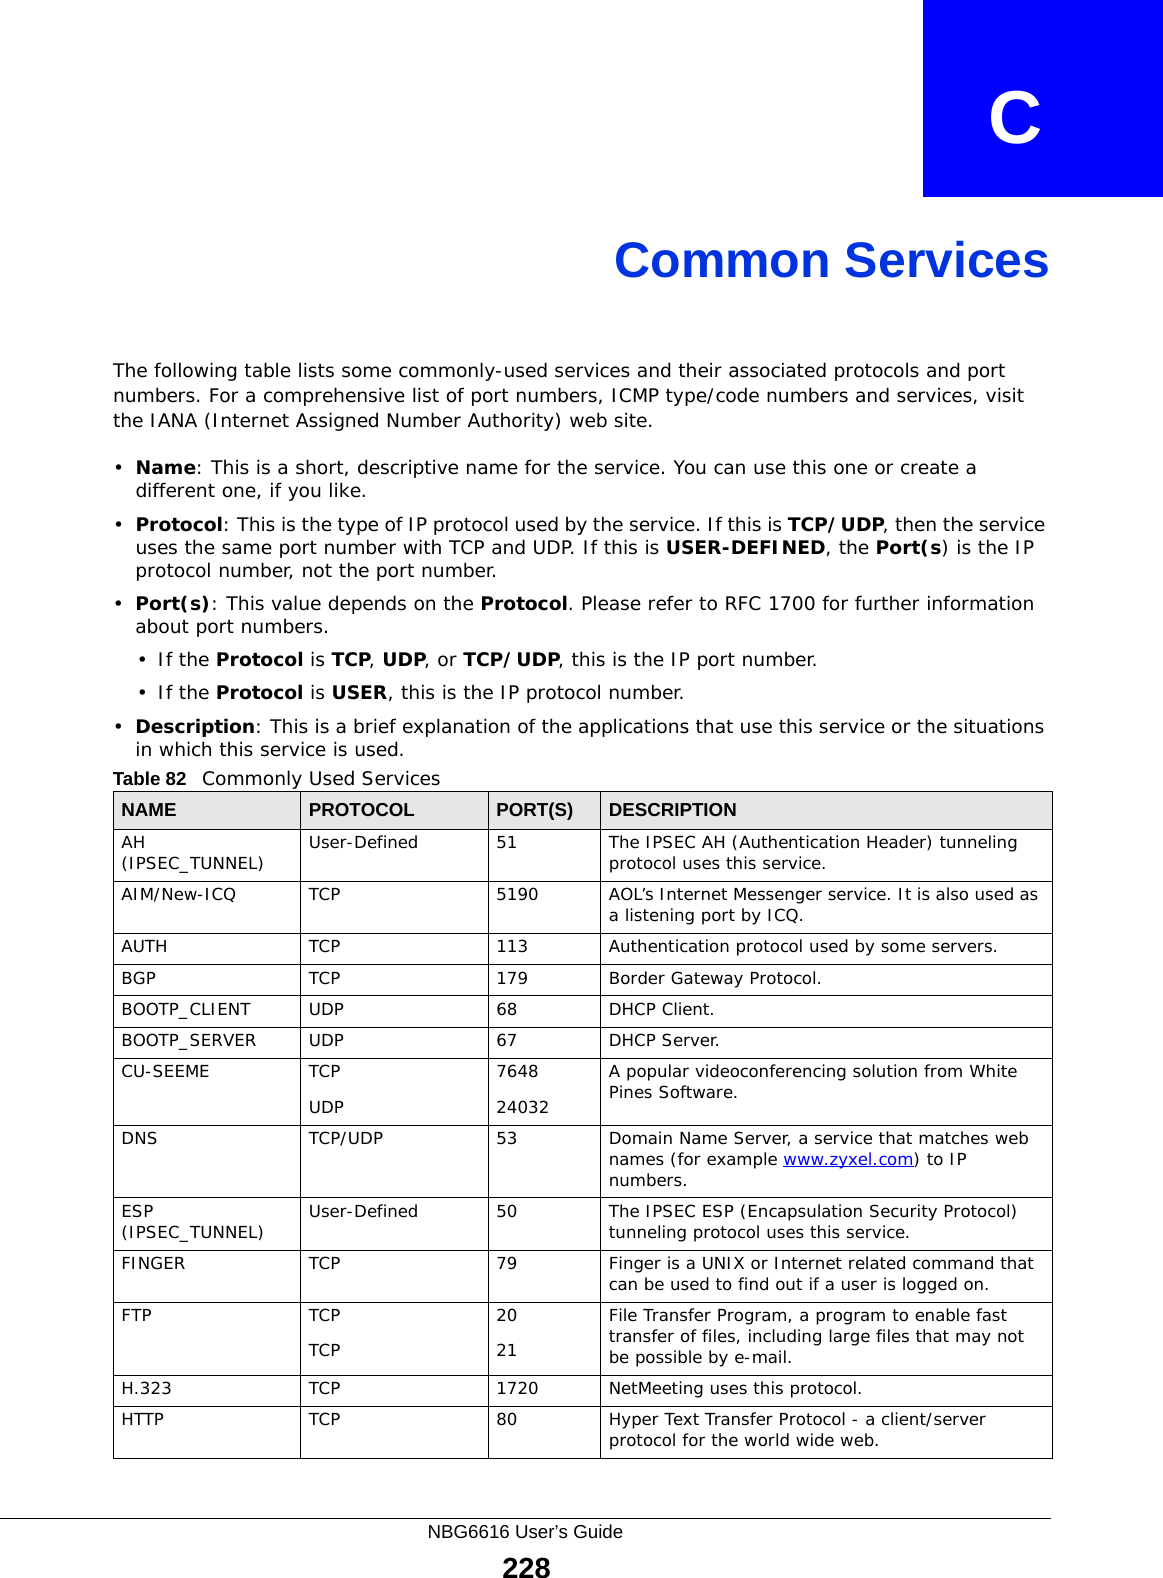 NBG6616 User’s Guide228APPENDIX   CCommon ServicesThe following table lists some commonly-used services and their associated protocols and port numbers. For a comprehensive list of port numbers, ICMP type/code numbers and services, visit the IANA (Internet Assigned Number Authority) web site. •Name: This is a short, descriptive name for the service. You can use this one or create a different one, if you like.•Protocol: This is the type of IP protocol used by the service. If this is TCP/UDP, then the service uses the same port number with TCP and UDP. If this is USER-DEFINED, the Port(s) is the IP protocol number, not the port number.•Port(s): This value depends on the Protocol. Please refer to RFC 1700 for further information about port numbers.•If the Protocol is TCP, UDP, or TCP/UDP, this is the IP port number.•If the Protocol is USER, this is the IP protocol number.•Description: This is a brief explanation of the applications that use this service or the situations in which this service is used.Table 82   Commonly Used ServicesNAME PROTOCOL PORT(S) DESCRIPTIONAH (IPSEC_TUNNEL) User-Defined 51 The IPSEC AH (Authentication Header) tunneling protocol uses this service.AIM/New-ICQ TCP 5190 AOL’s Internet Messenger service. It is also used as a listening port by ICQ.AUTH TCP 113 Authentication protocol used by some servers.BGP TCP 179 Border Gateway Protocol.BOOTP_CLIENT UDP 68 DHCP Client.BOOTP_SERVER UDP 67 DHCP Server.CU-SEEME TCPUDP764824032A popular videoconferencing solution from White Pines Software.DNS TCP/UDP 53 Domain Name Server, a service that matches web names (for example www.zyxel.com) to IP numbers.ESP (IPSEC_TUNNEL) User-Defined 50 The IPSEC ESP (Encapsulation Security Protocol) tunneling protocol uses this service.FINGER TCP 79 Finger is a UNIX or Internet related command that can be used to find out if a user is logged on.FTP TCPTCP2021File Transfer Program, a program to enable fast transfer of files, including large files that may not be possible by e-mail.H.323 TCP 1720 NetMeeting uses this protocol.HTTP TCP 80 Hyper Text Transfer Protocol - a client/server protocol for the world wide web.